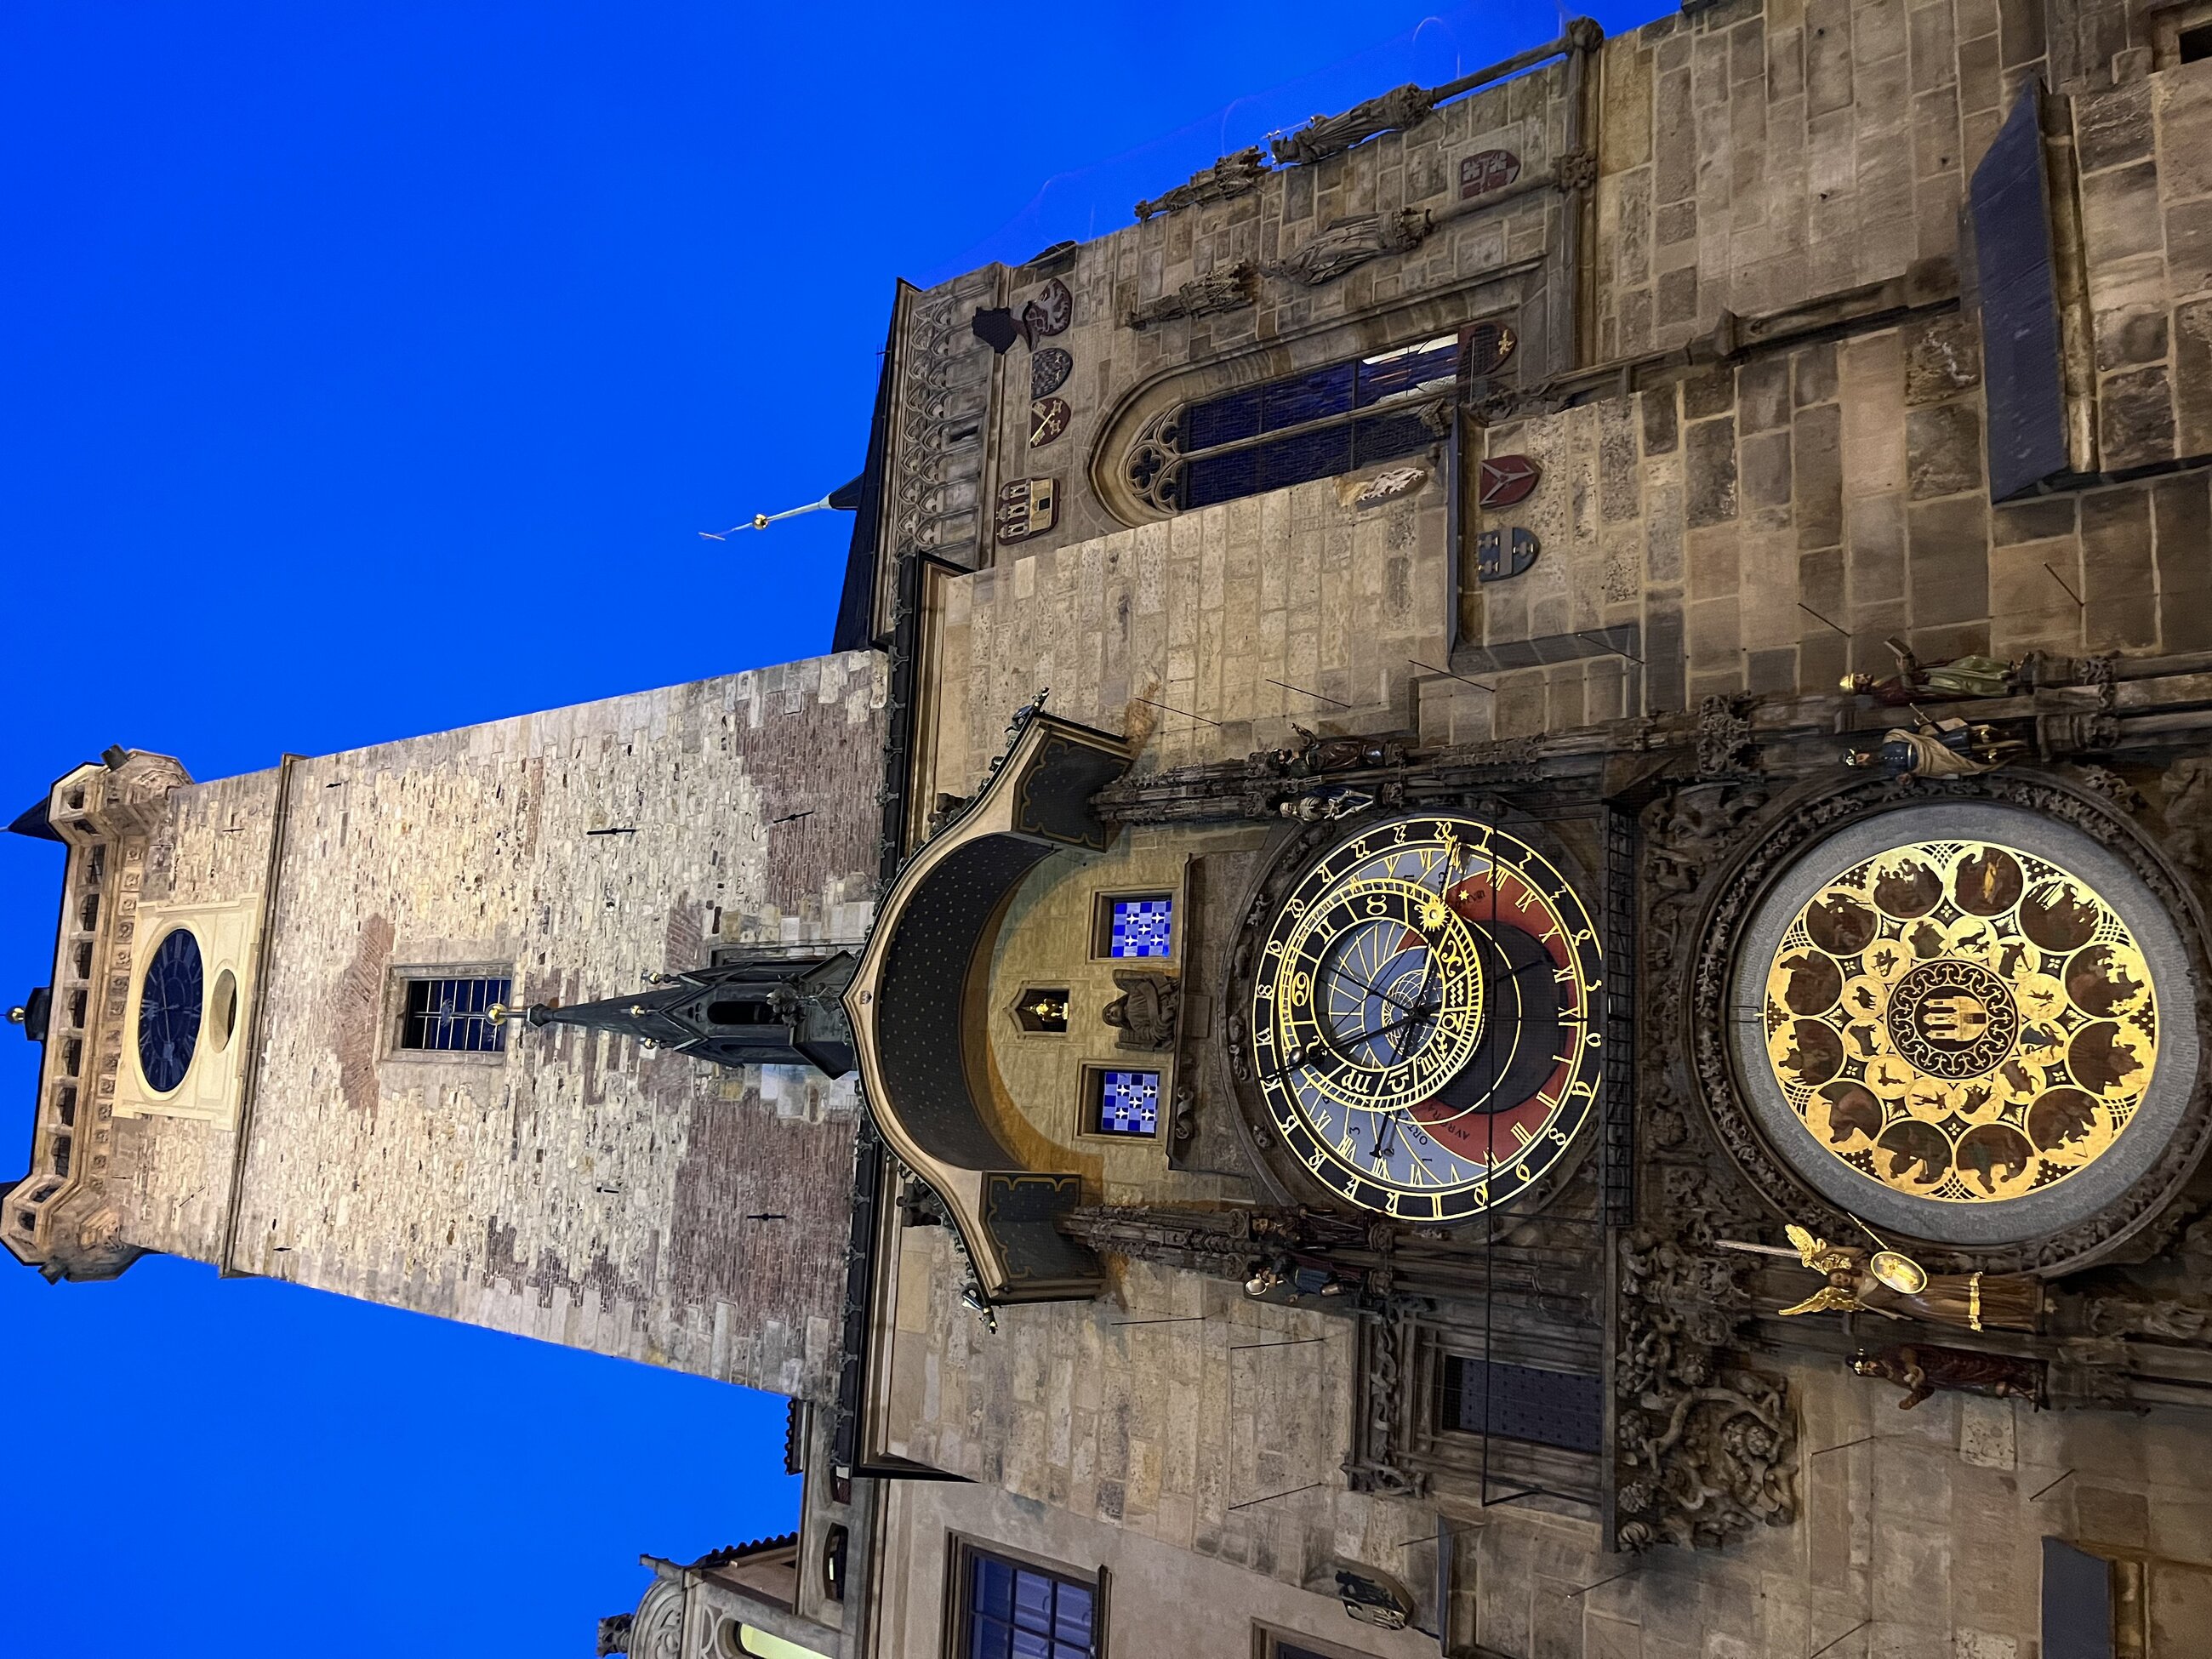 Nighttime view of the Old Town Astronomical Clock - a must see in Prague!